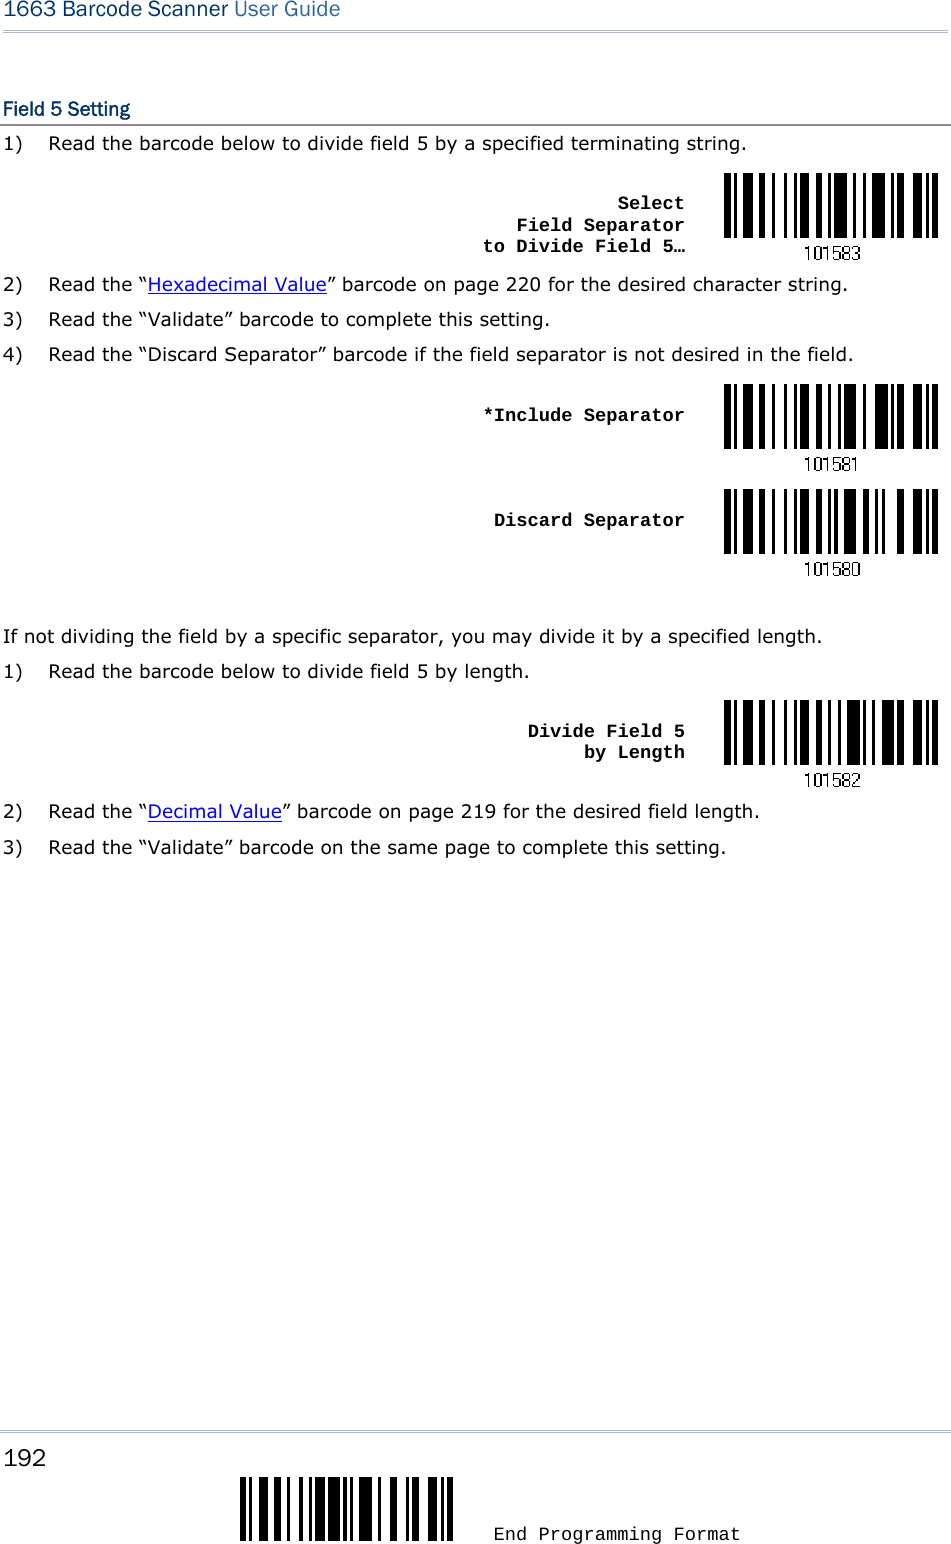 192  End Programming Format 1663 Barcode Scanner User Guide  Field 5 Setting 1)  Read the barcode below to divide field 5 by a specified terminating string.  Select  Field Separator  to Divide Field 5…2)  Read the “Hexadecimal Value” barcode on page 220 for the desired character string. 3)  Read the “Validate” barcode to complete this setting. 4)  Read the “Discard Separator” barcode if the field separator is not desired in the field.  *Include Separator Discard Separator If not dividing the field by a specific separator, you may divide it by a specified length. 1)  Read the barcode below to divide field 5 by length.  Divide Field 5  by Length2)  Read the “Decimal Value” barcode on page 219 for the desired field length. 3)  Read the “Validate” barcode on the same page to complete this setting.         